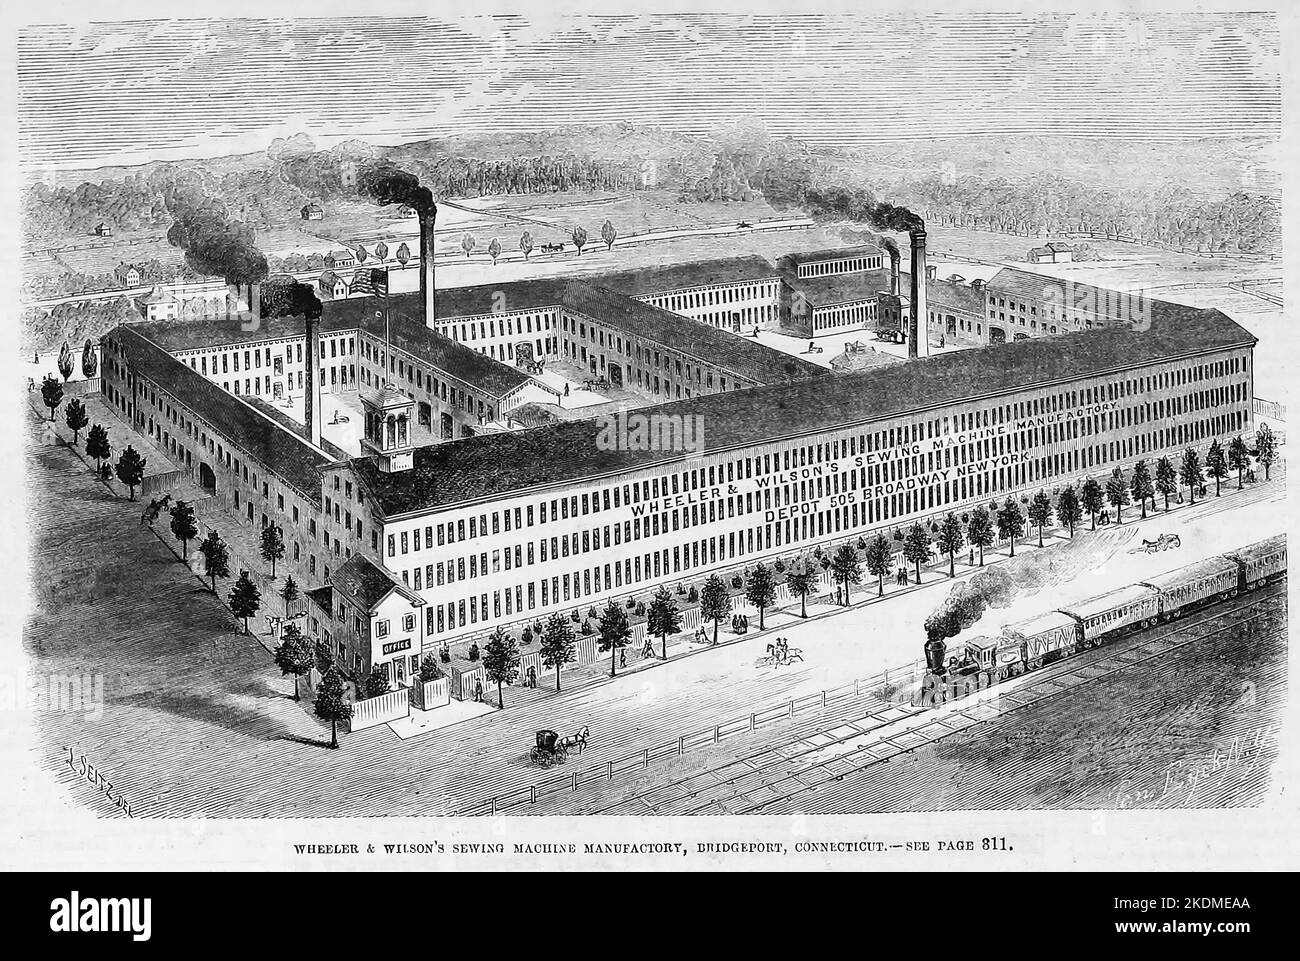 Wheeler and Wilson Sewing Machine Manufactory, Bridgeport, Connecticut. January 1863. 19th century American Civil War illustration from Frank Leslie's Illustrated Newspaper Stock Photo